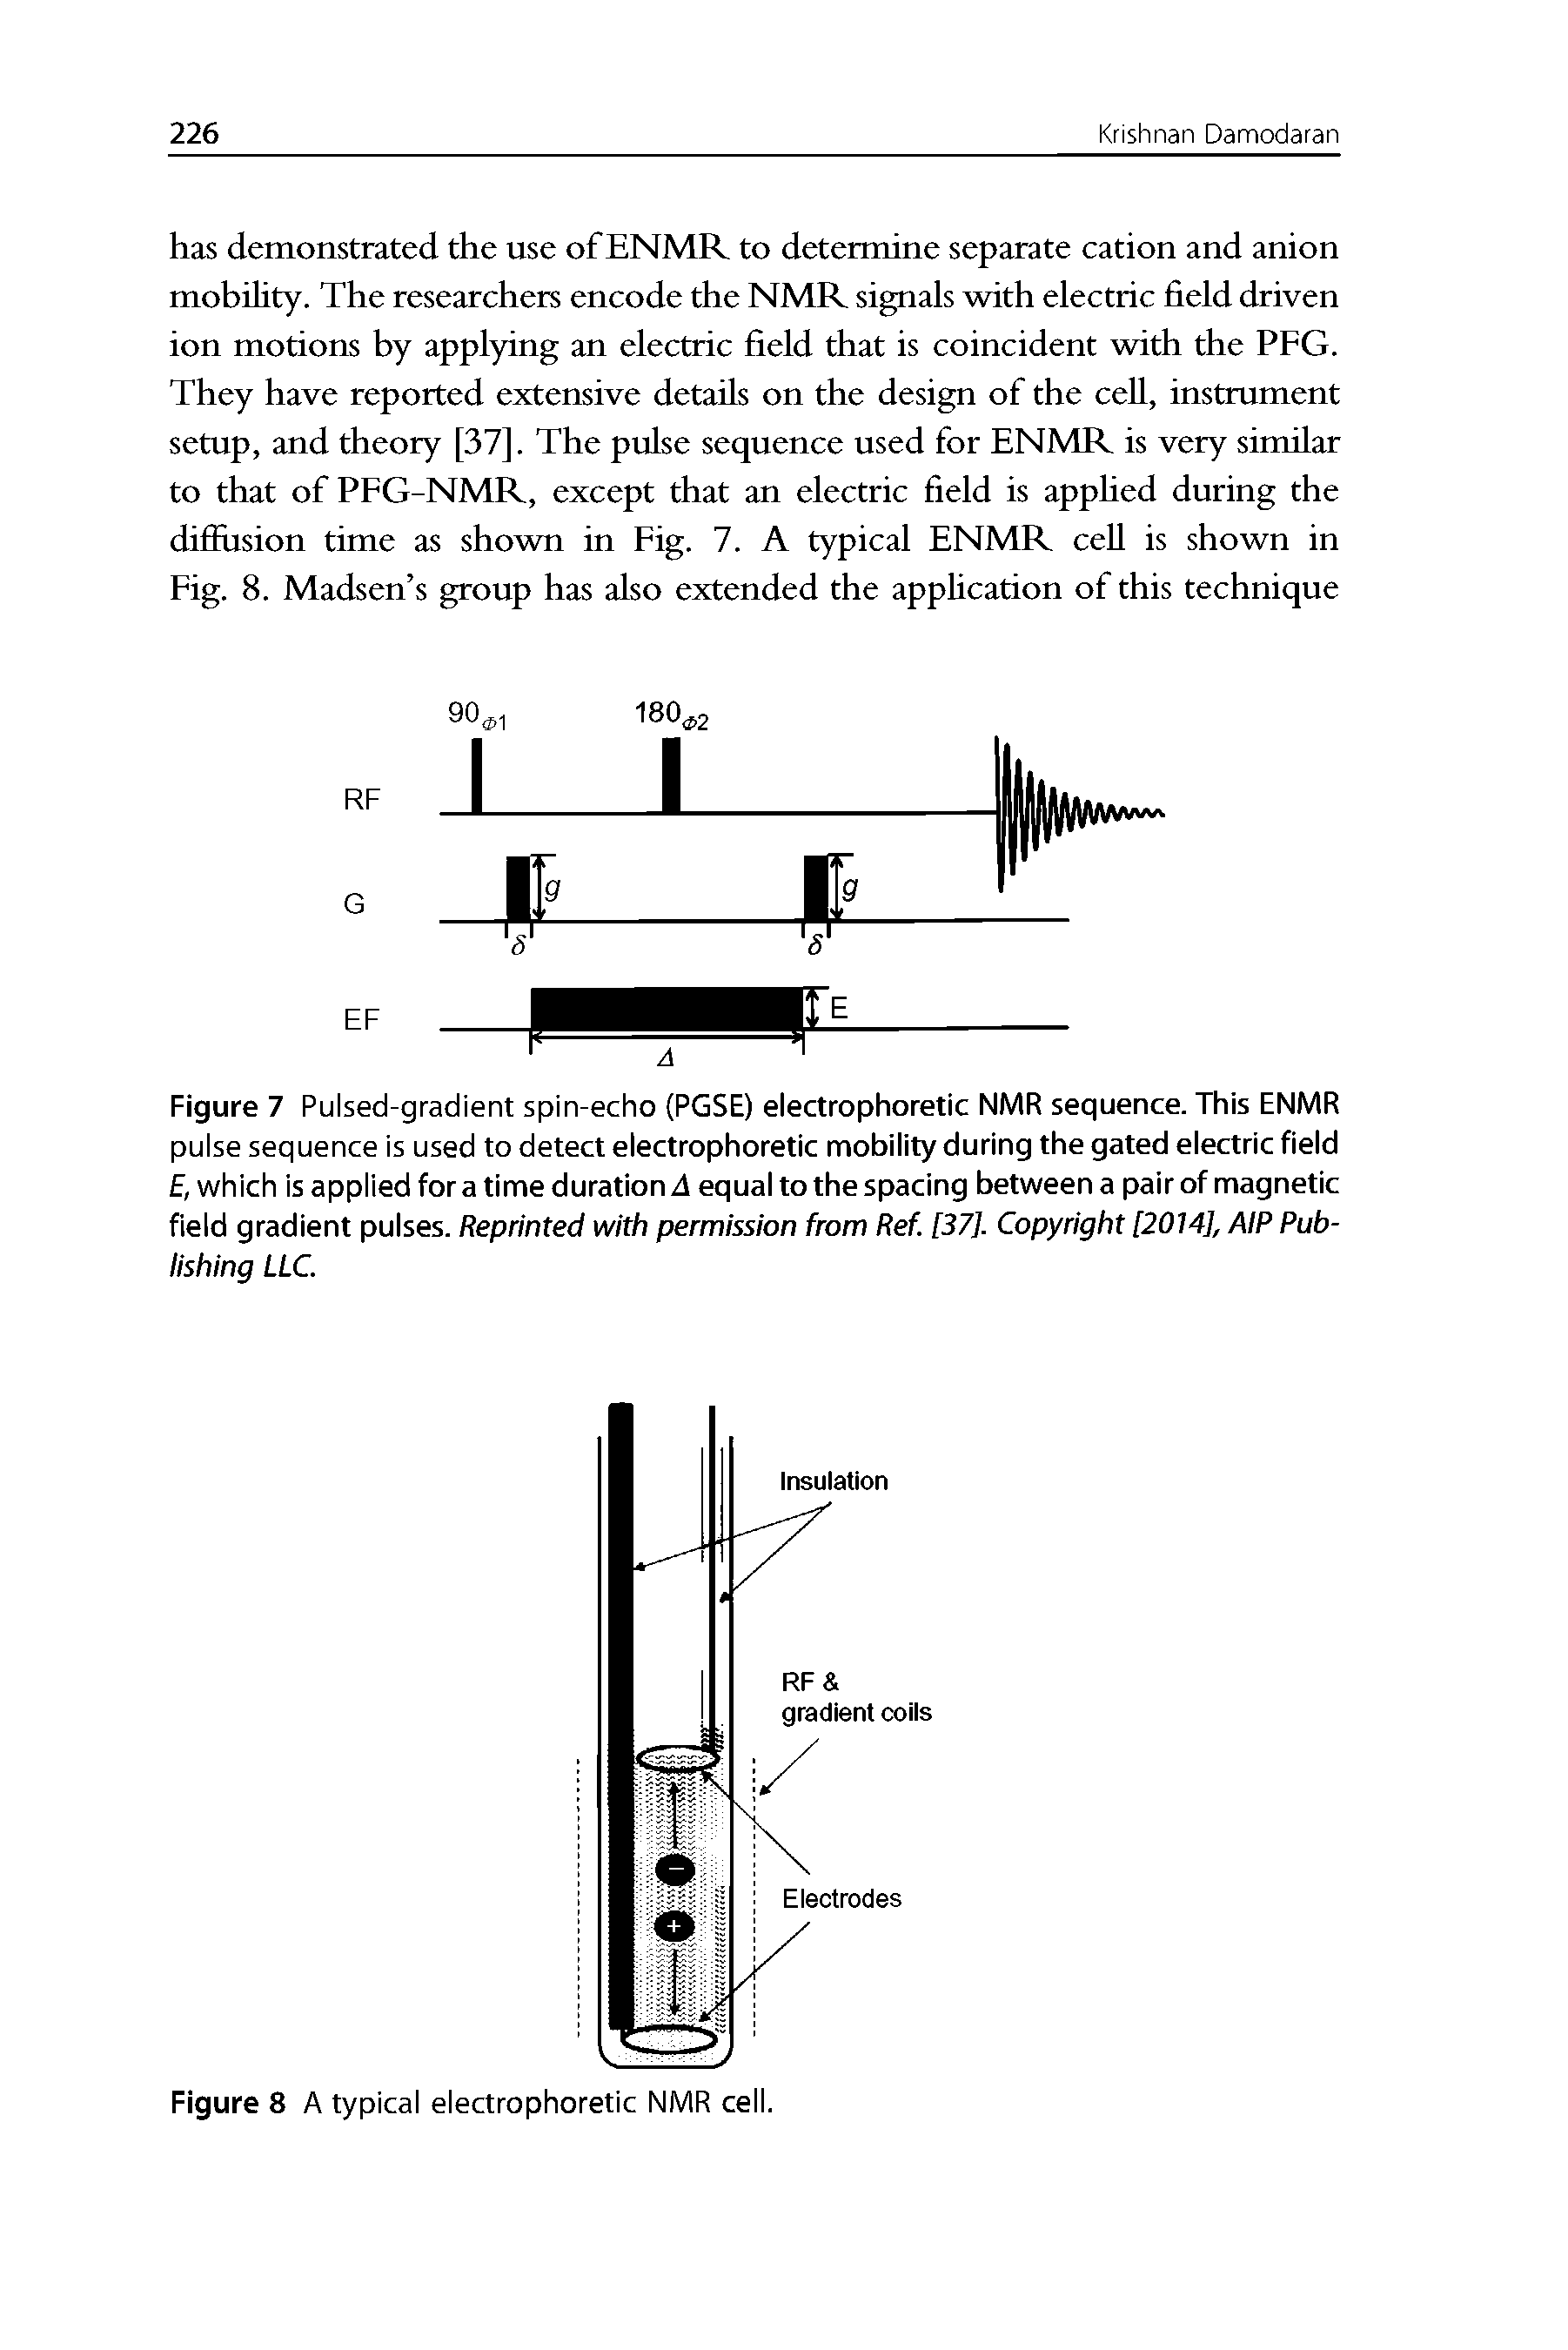 Figure 7 Pulsed-gradient spin-echo (PGSE) electrophoretic NMR sequence. This ENMR pulse sequence is used to detect electrophoretic mobility during the gated electric field E, which is applied fora time duration 3 equal to the spacing between a pair of magnetic field gradient pulses. Reprinted with permission from Ref. [37], Copyright [2014], AlP Publishing LLC.